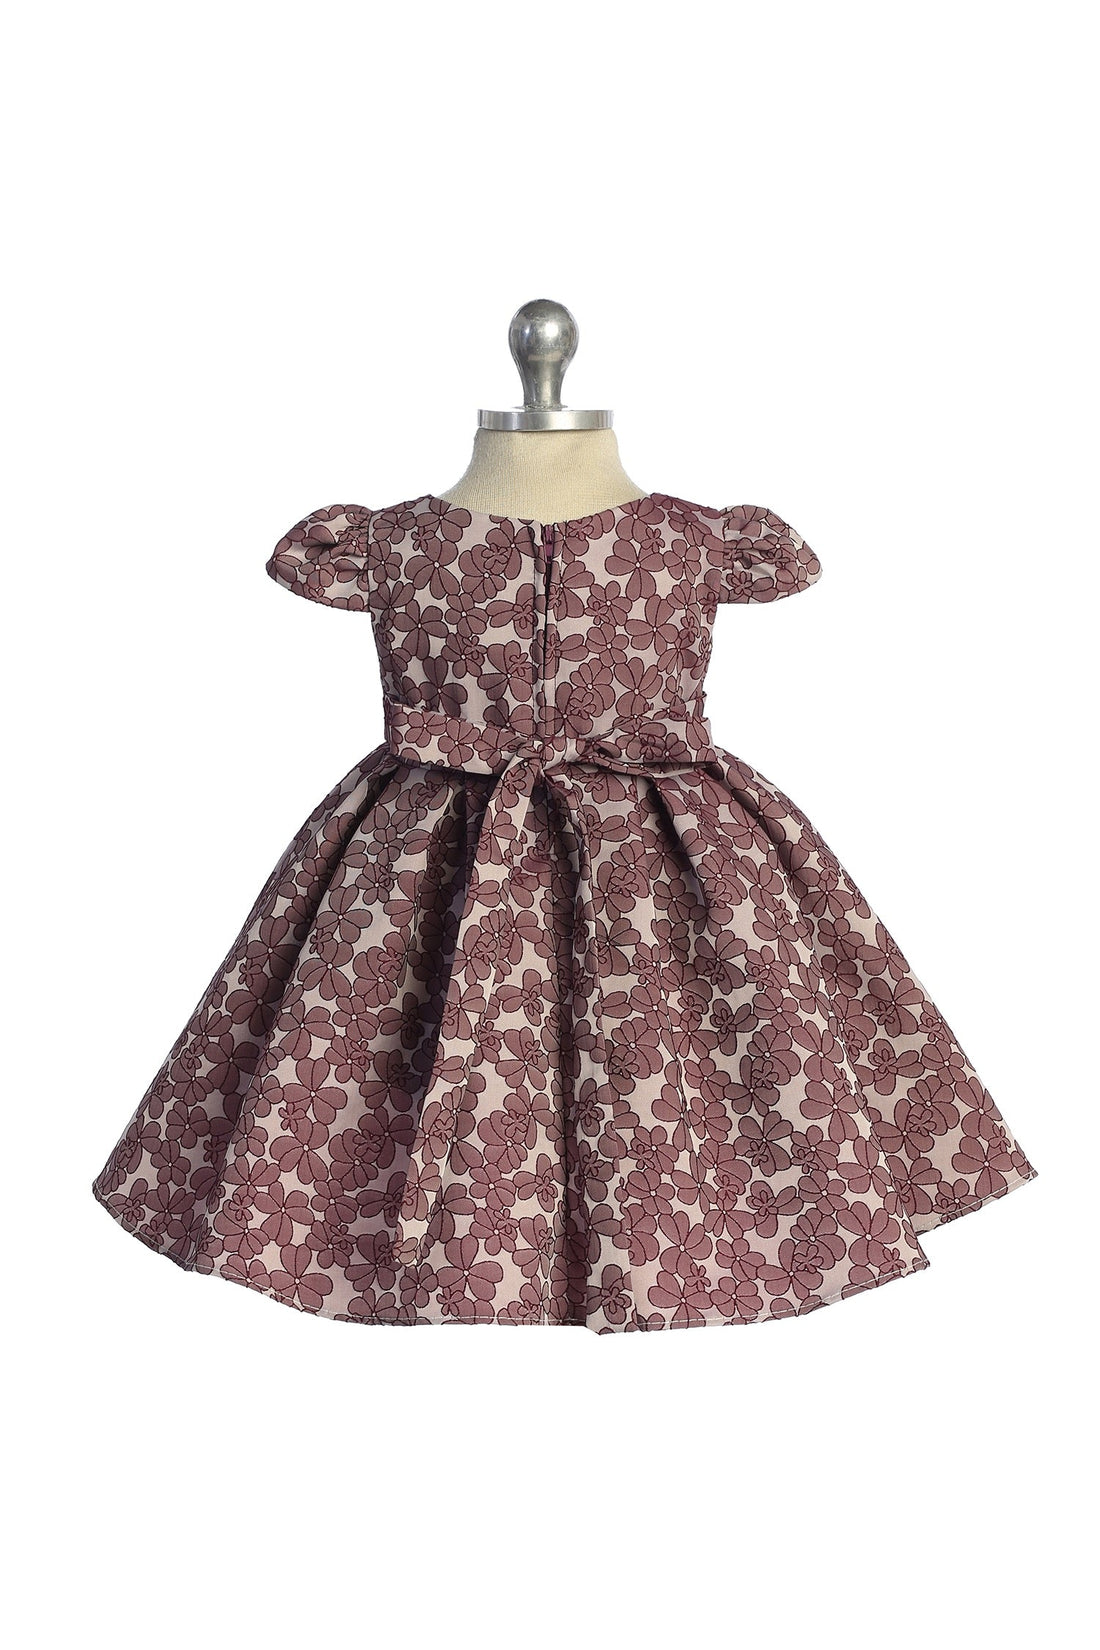 Baby Floral Sleeve Girl Party Dress by AS548B Kids Dream